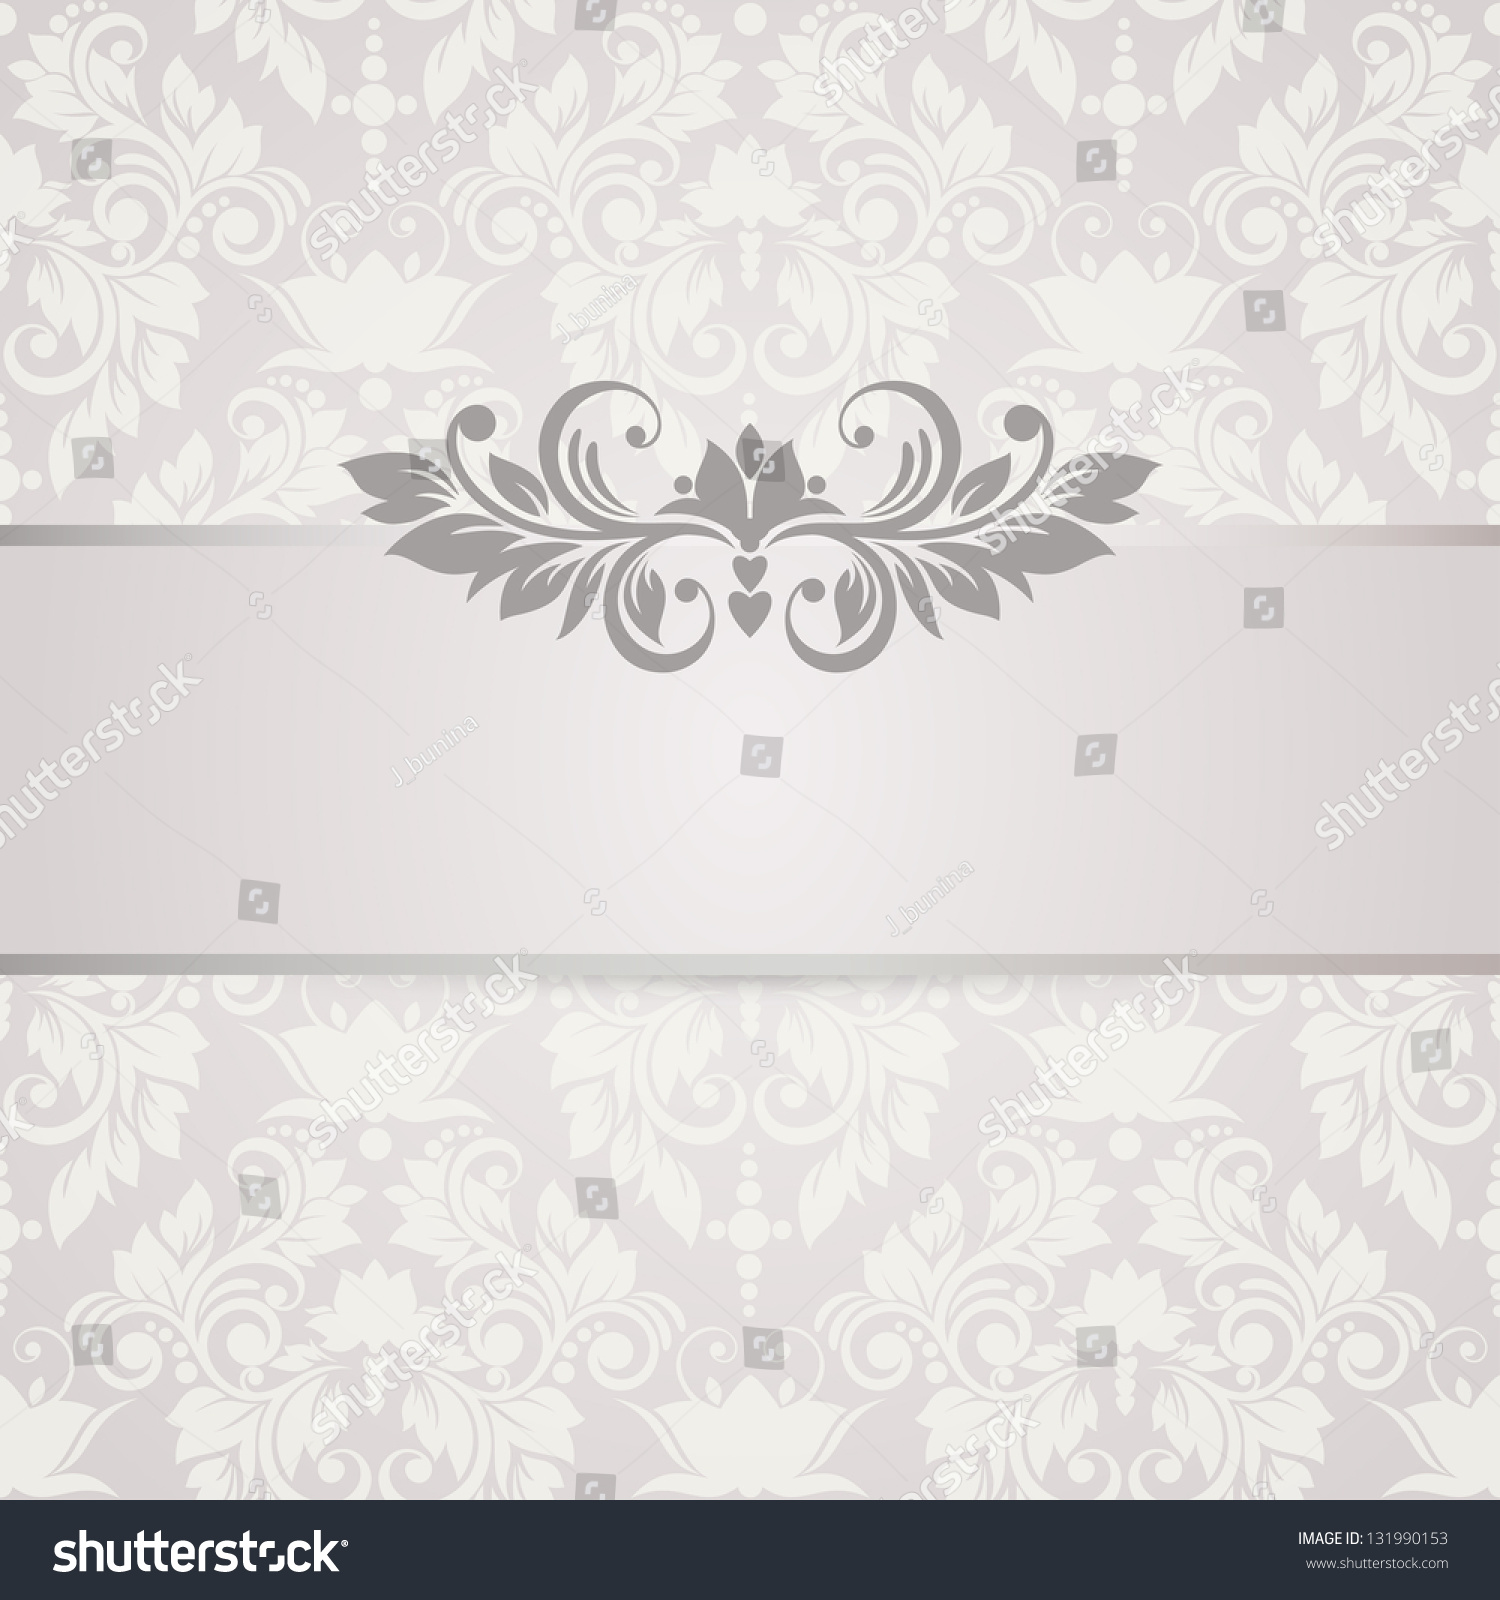 25 Images Marriage Card Background